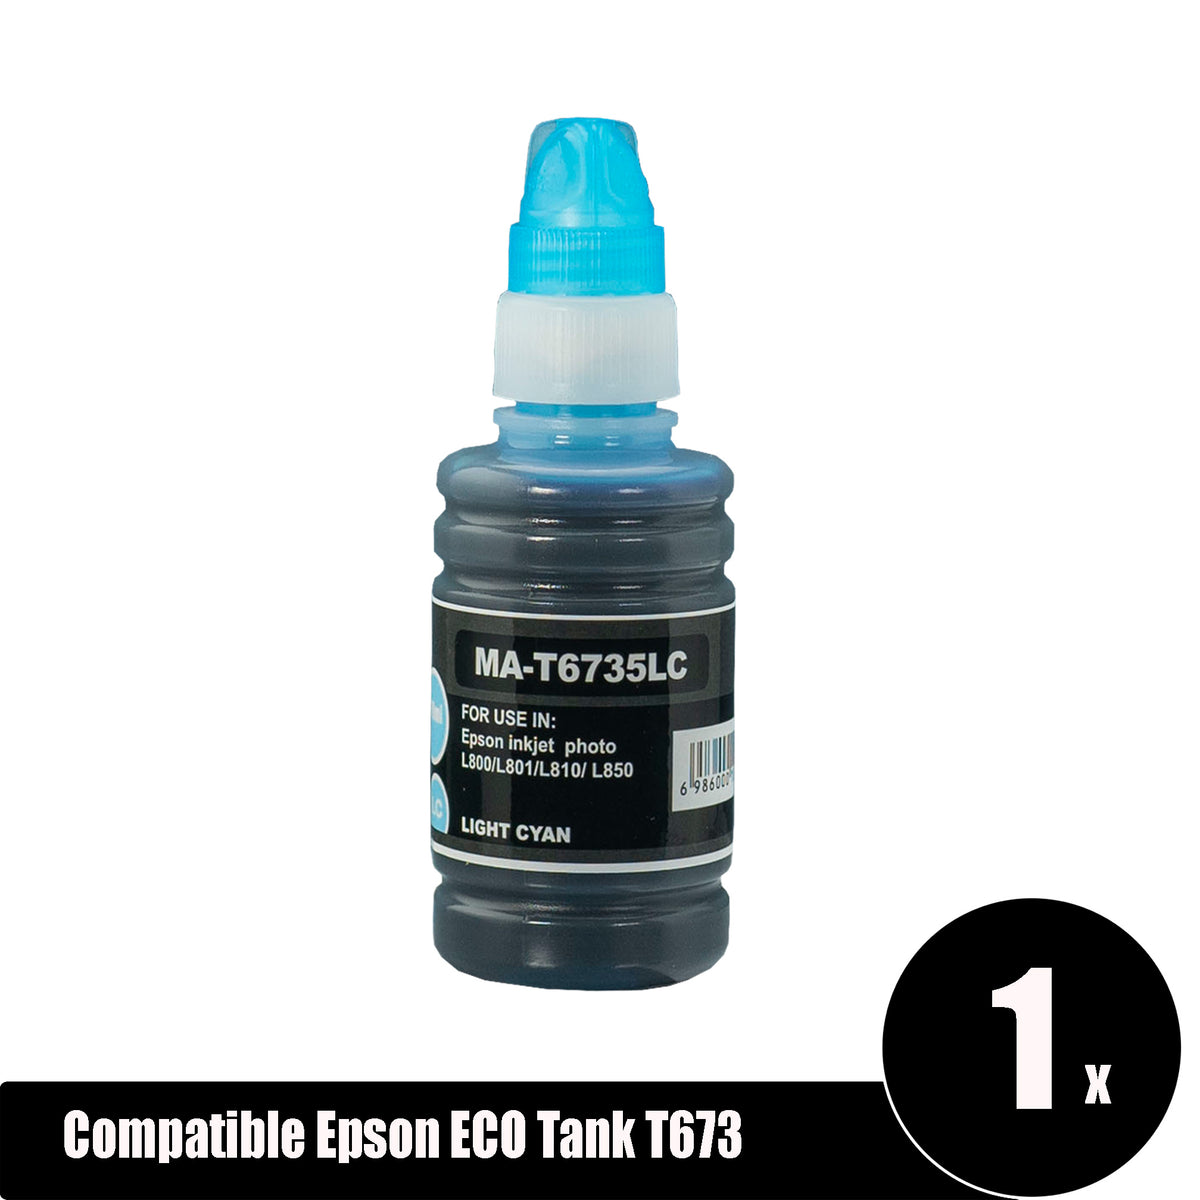 Compatible Epson ECO Tank T673 Light Cyan Ink